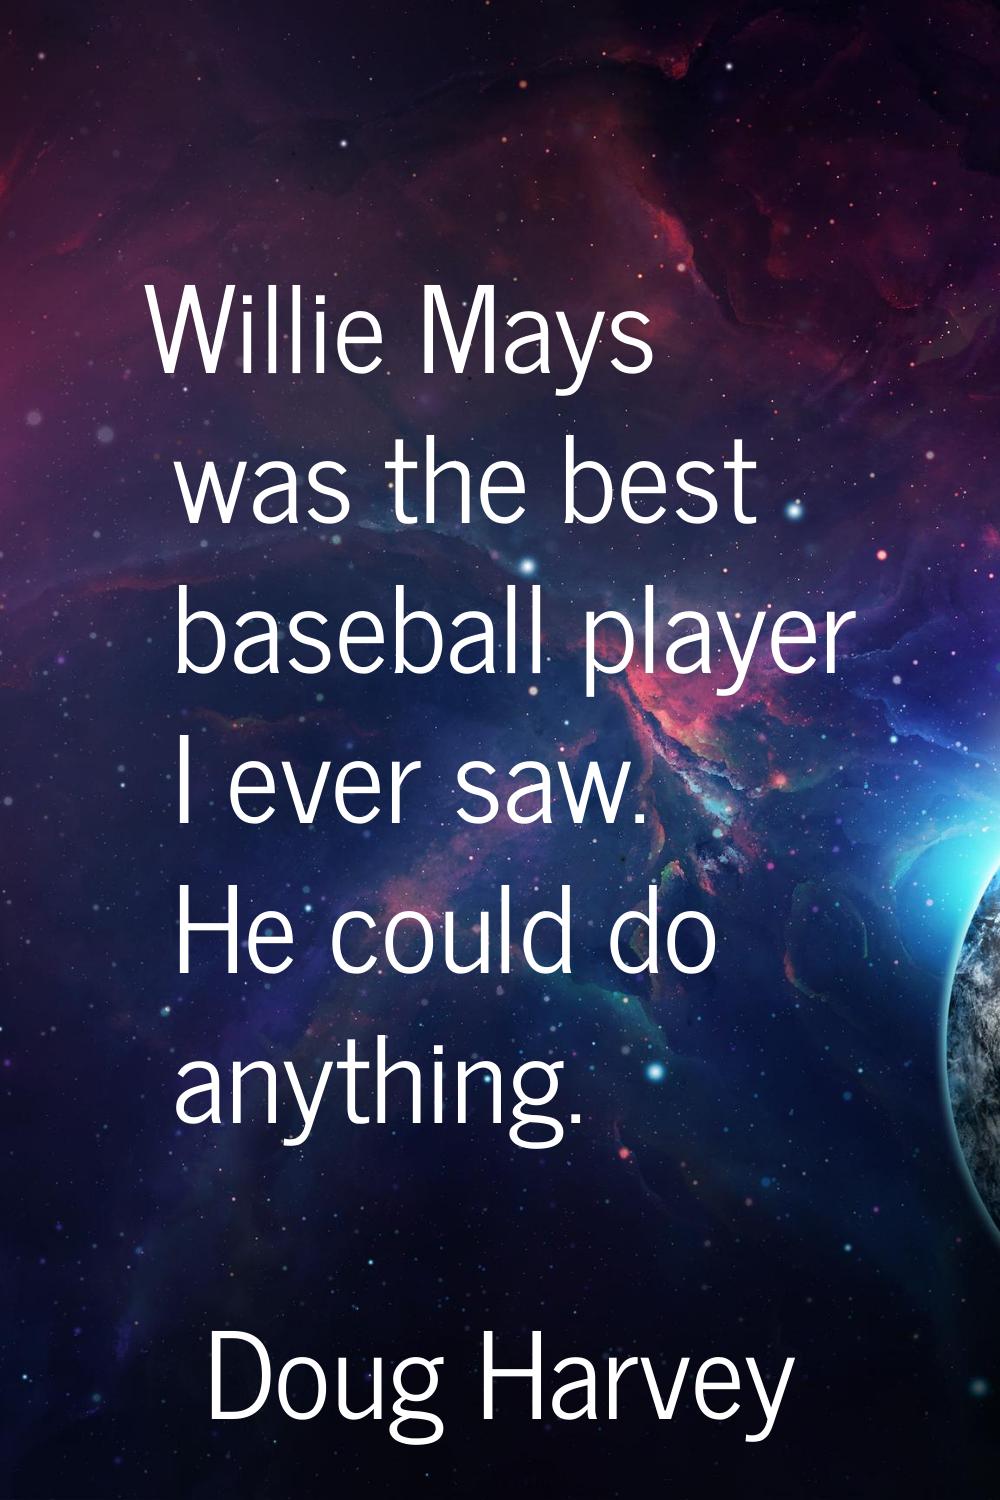 Willie Mays was the best baseball player I ever saw. He could do anything.